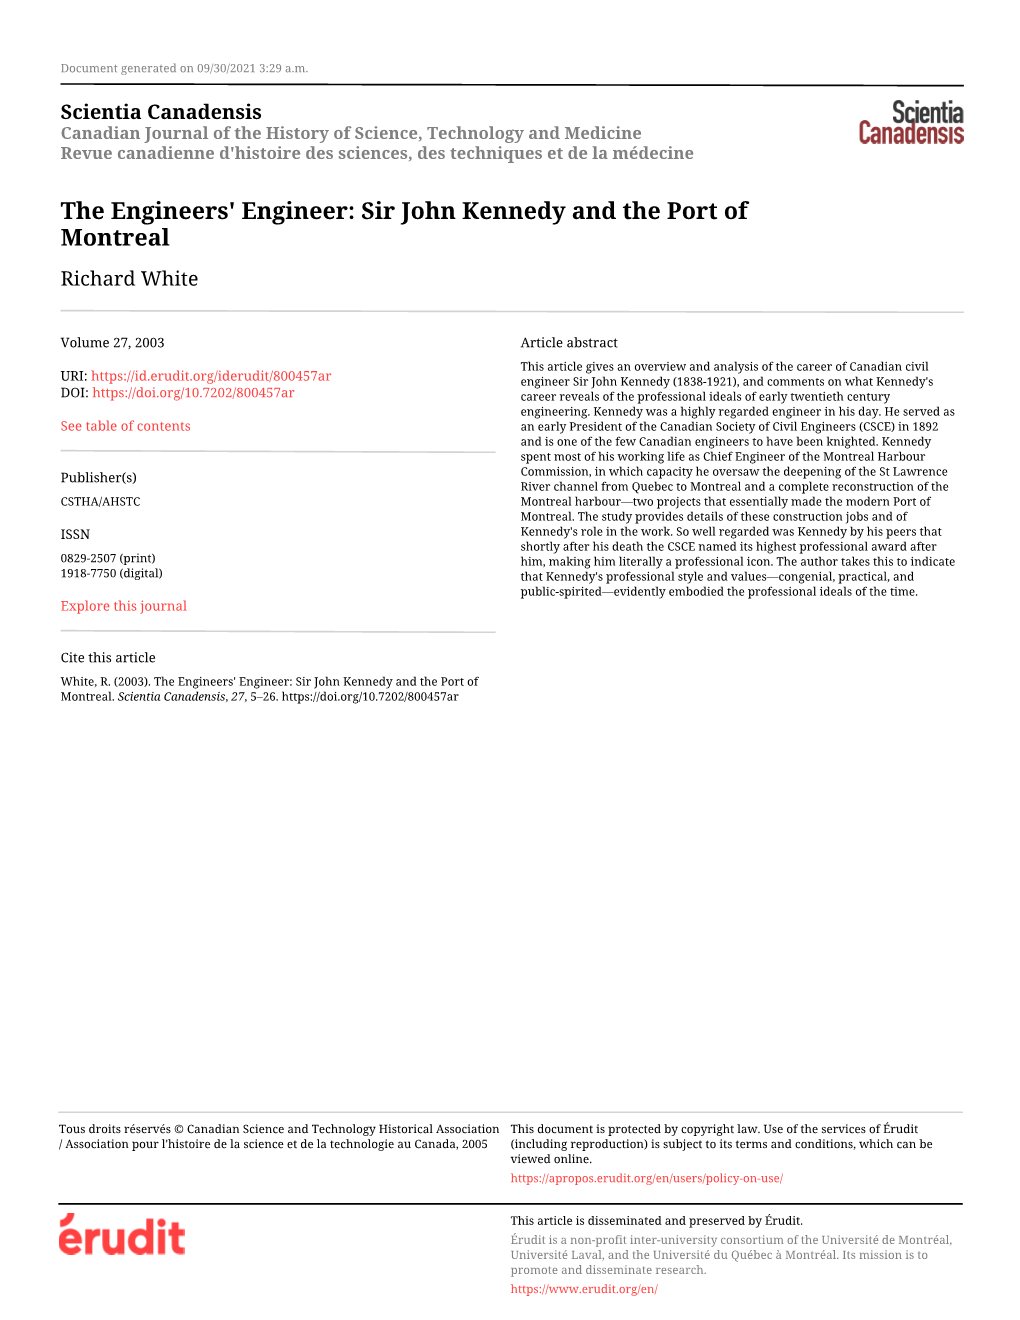 The Engineers' Engineer: Sir John Kennedy and the Port of Montreal Richard White